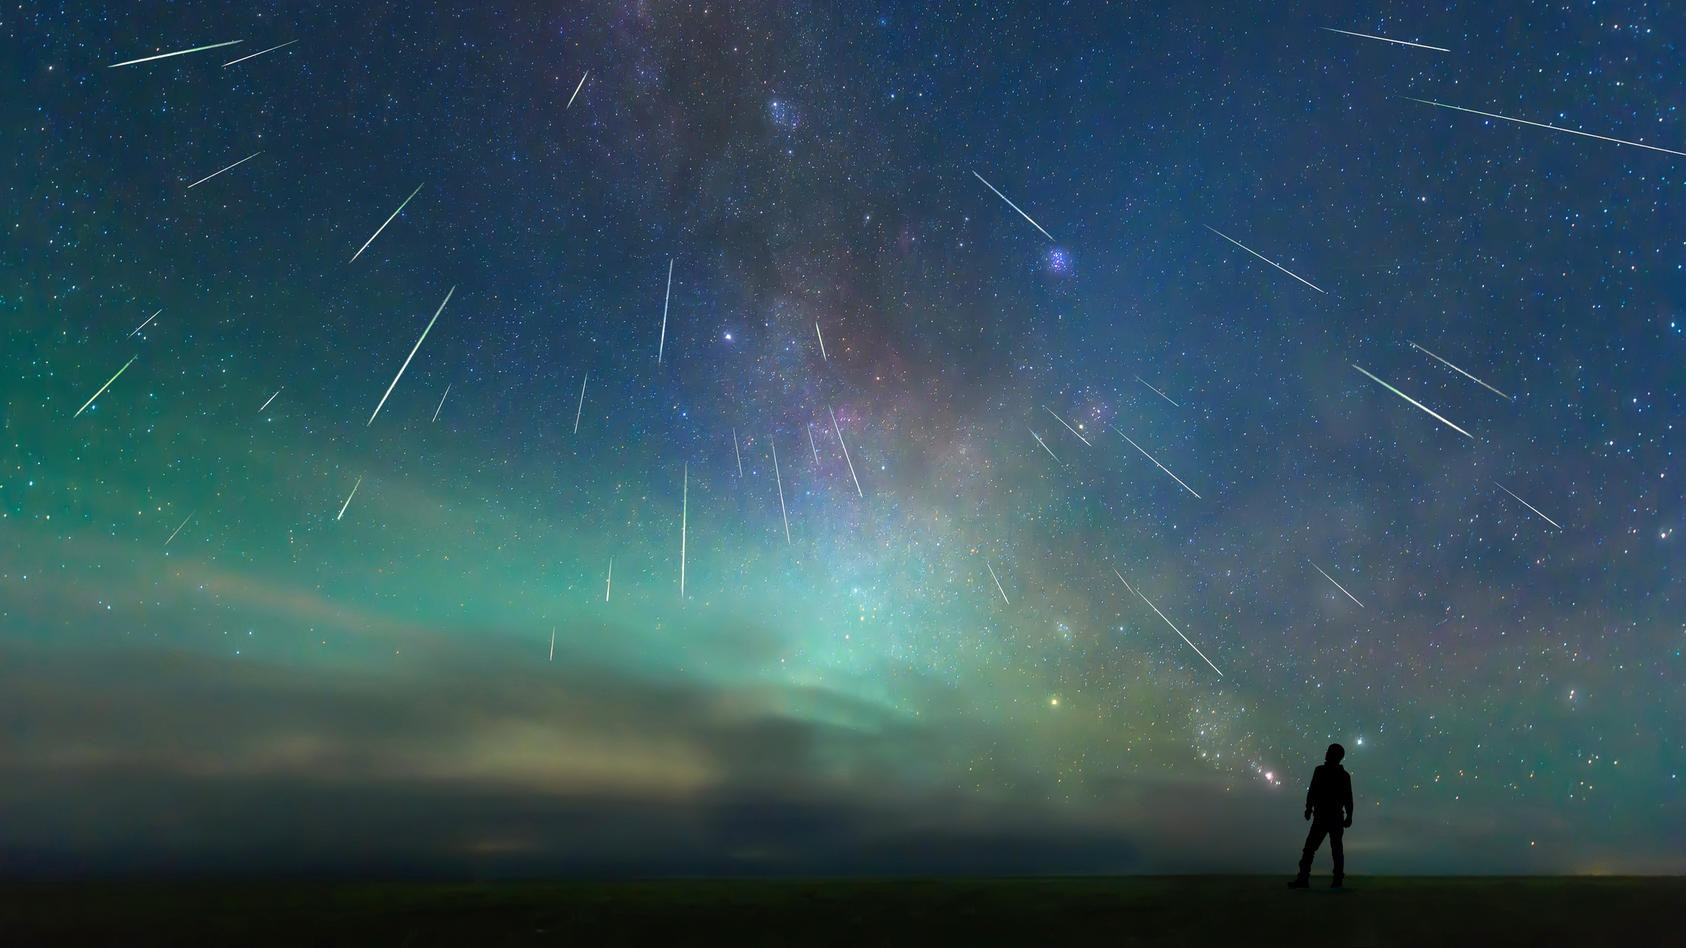 Shooting stars in July: When will the Perseids come over Germany?